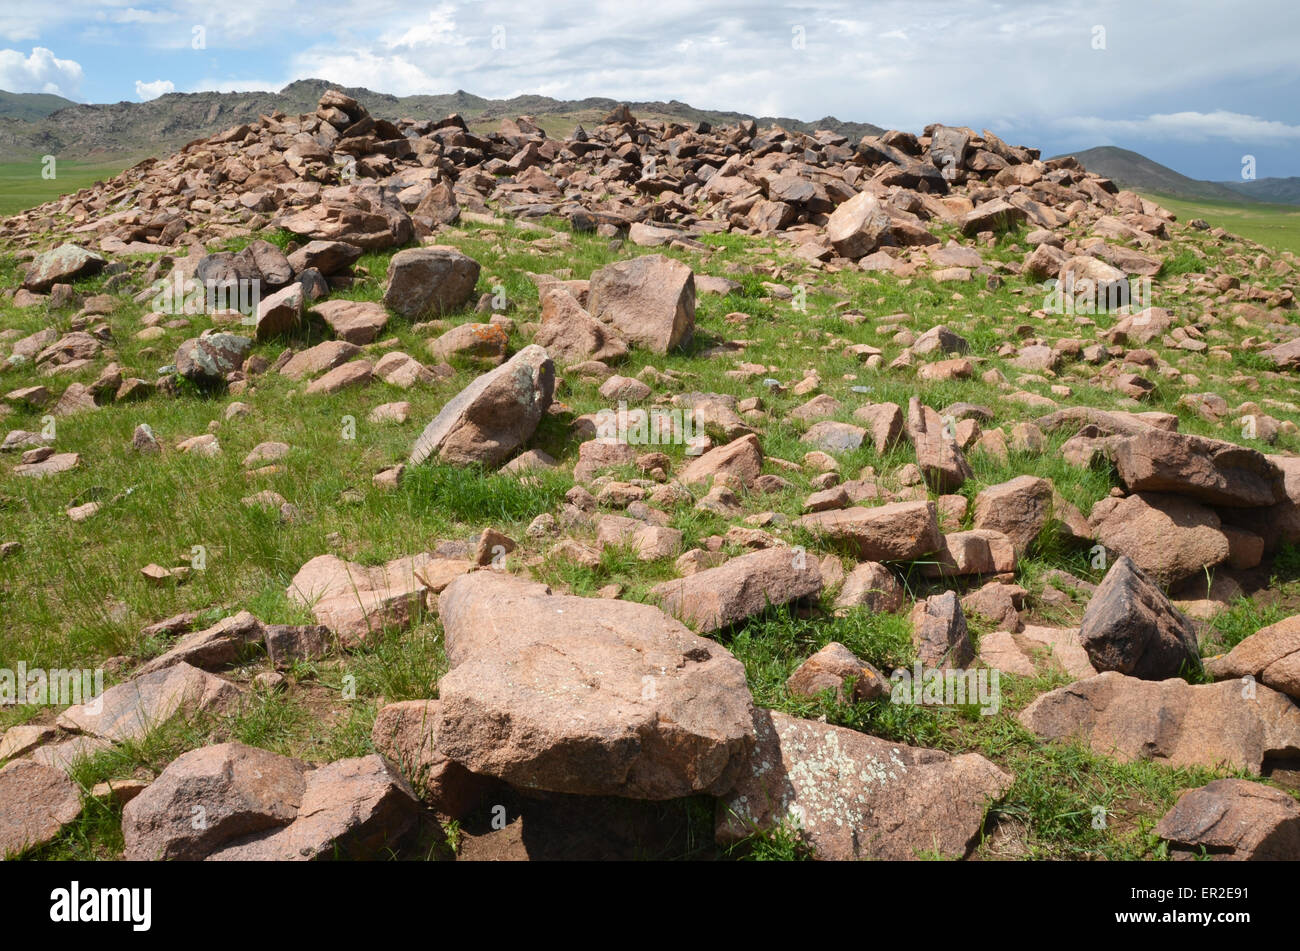 Burial mounds near the city of Moron, Ovsgol province, northern Mongolia. Stock Photo